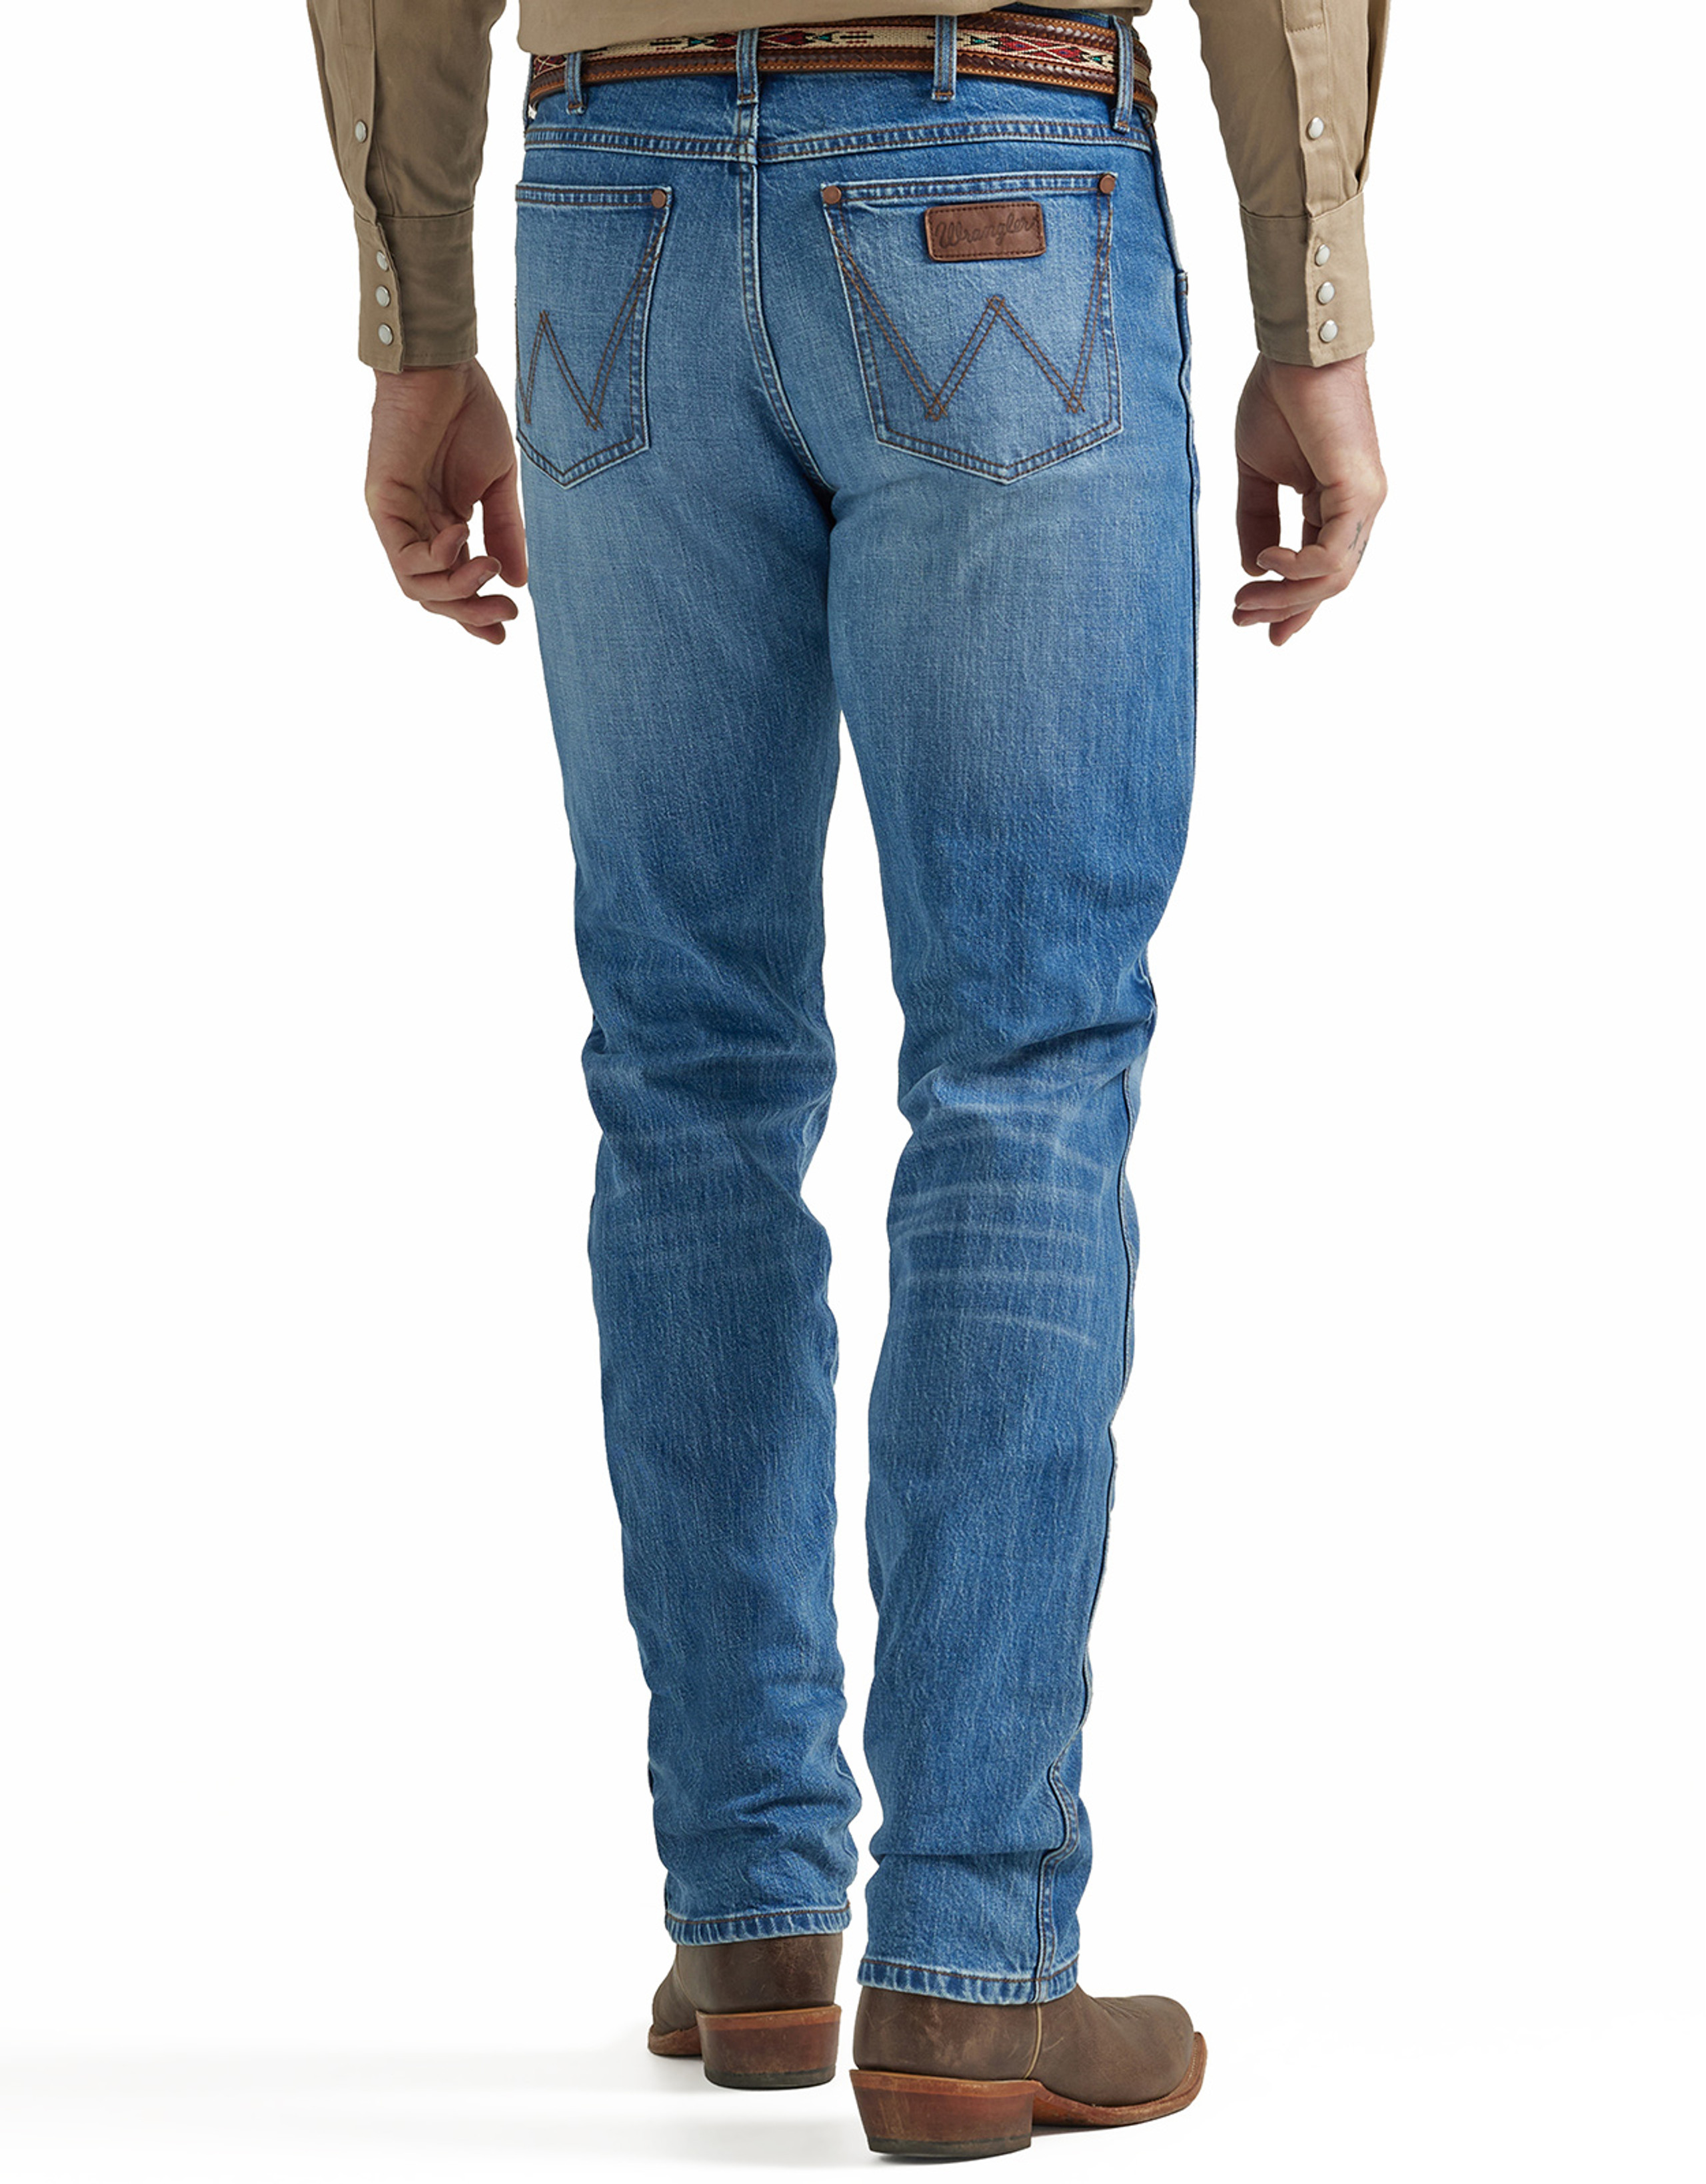 Men's Clearance - Western Clothing, Boots & Accessories